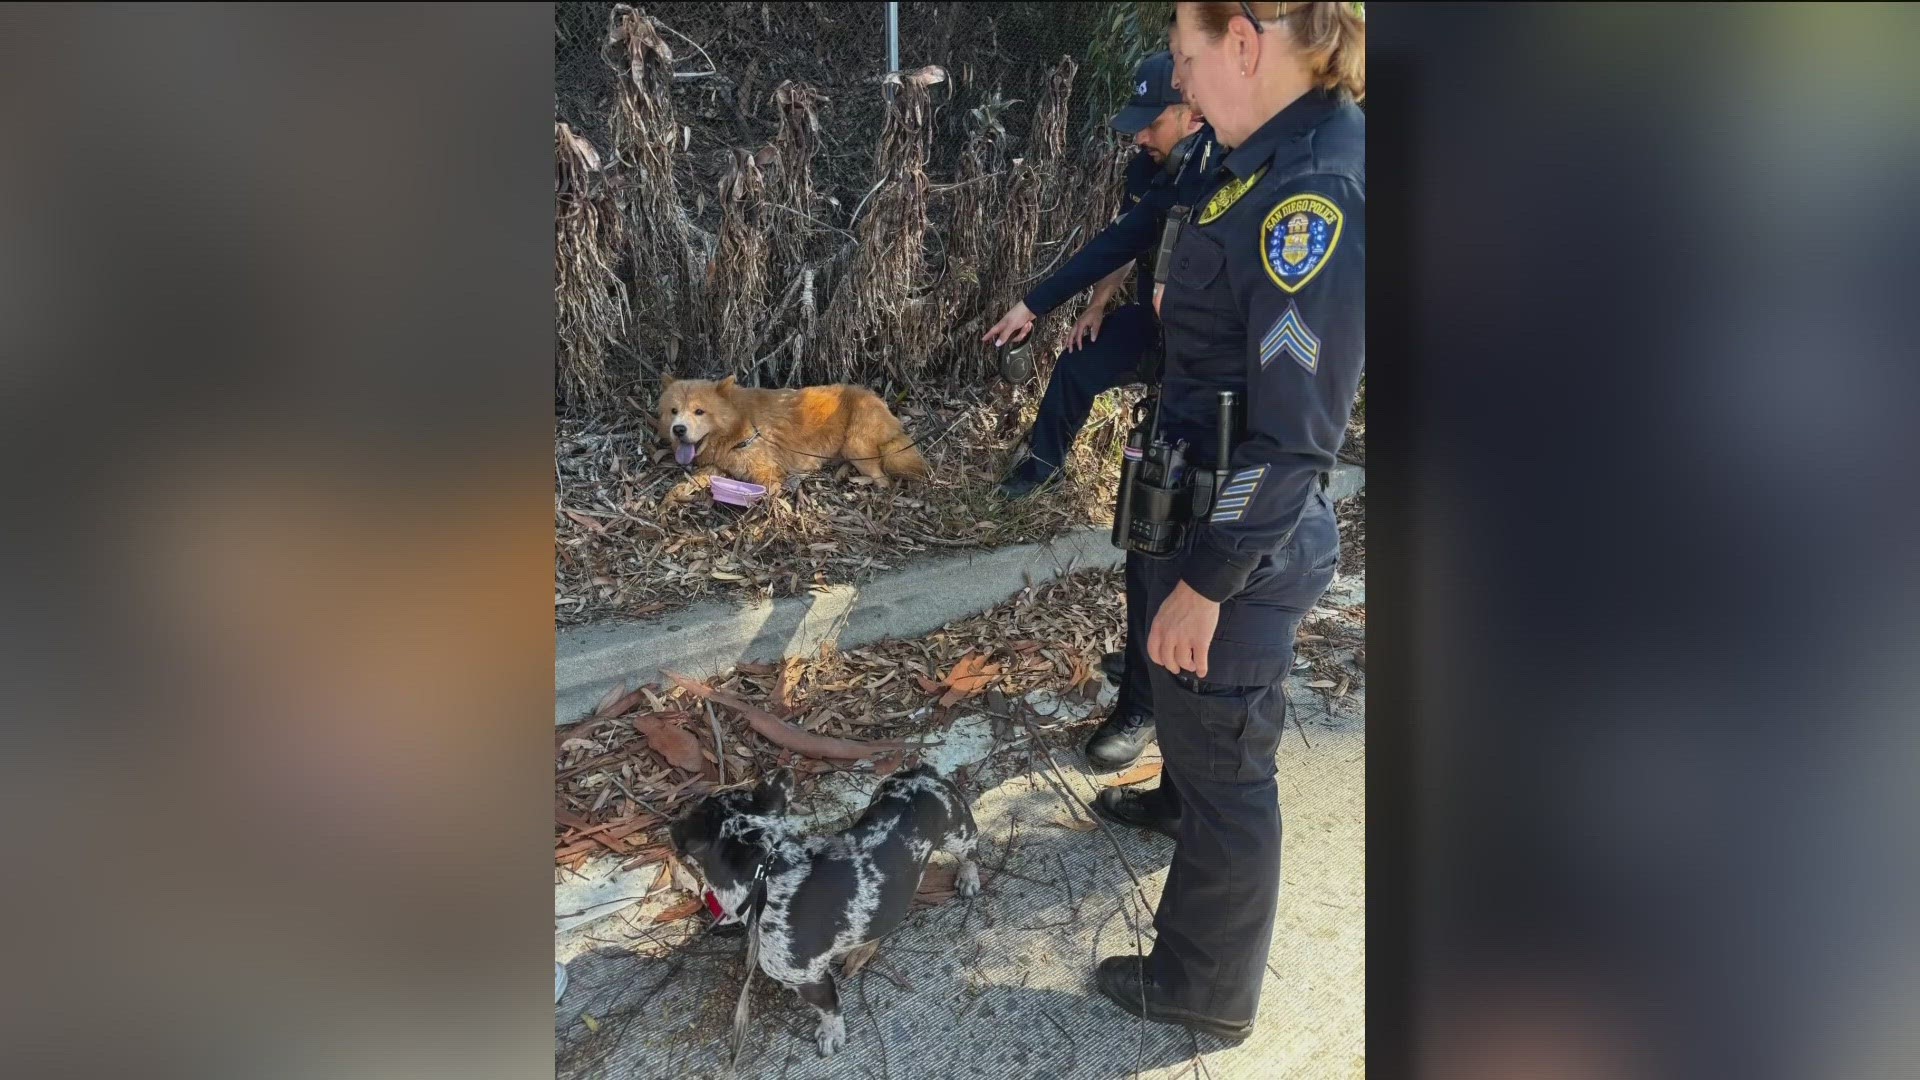 A local dog found his way onto the freeway over the weekend, but thanks to some good Samaritans and several officers, he made it home safely.